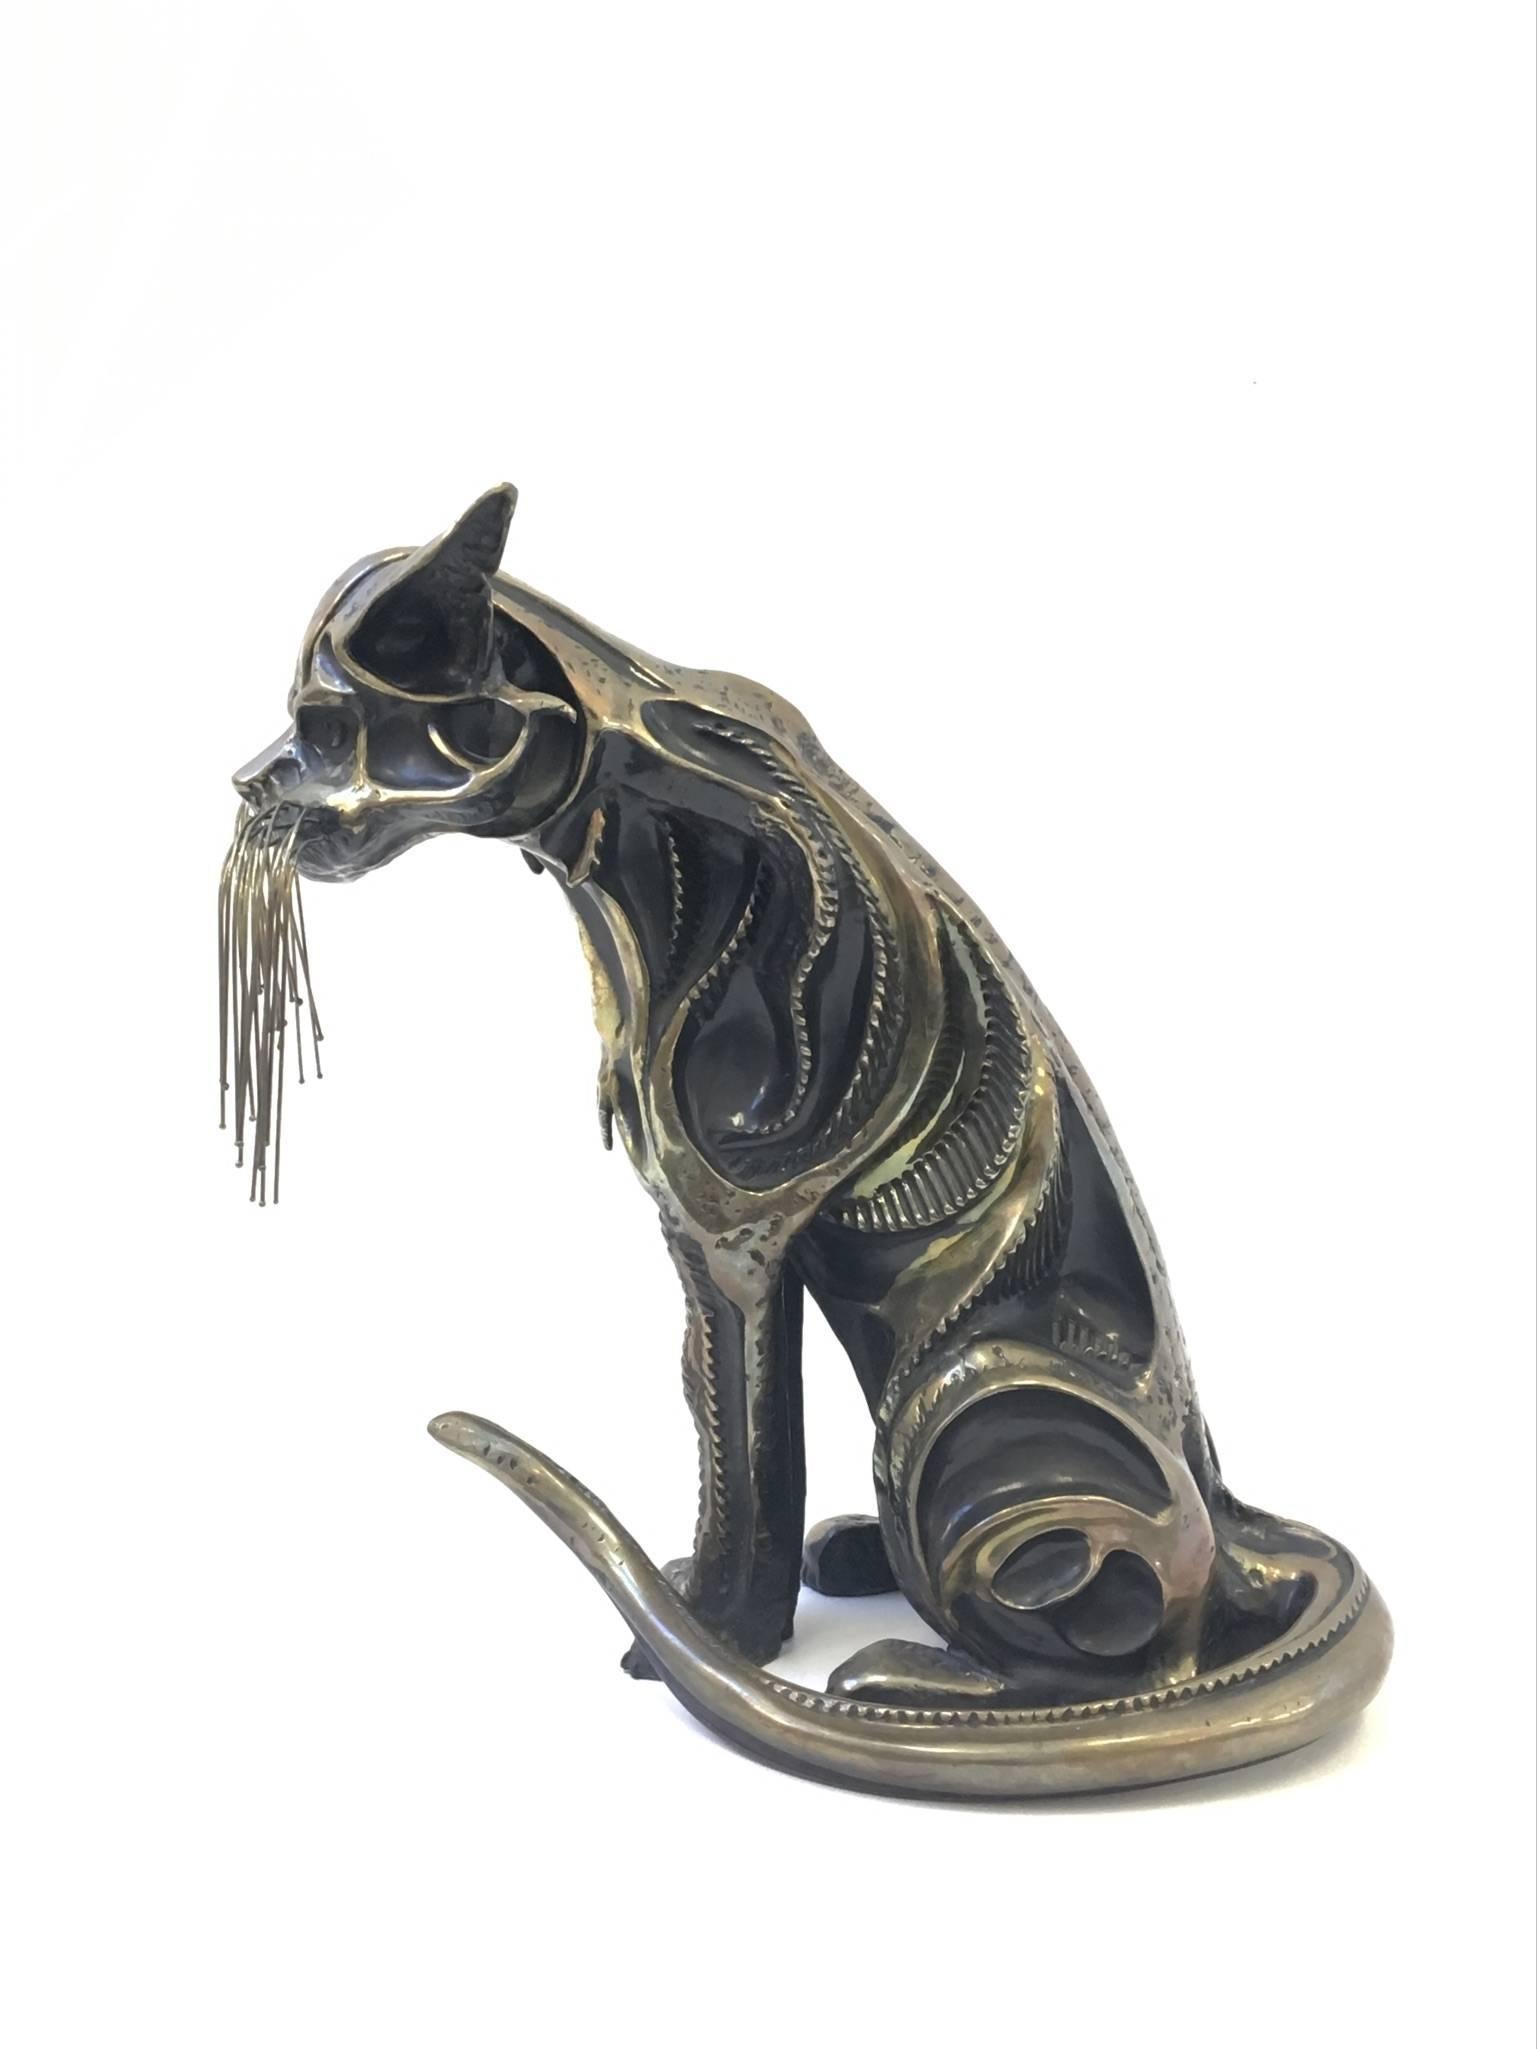 A amazing cast bronze cat sculpture by Internationally known Sculptor John Jagger. Title of the sculpture is 